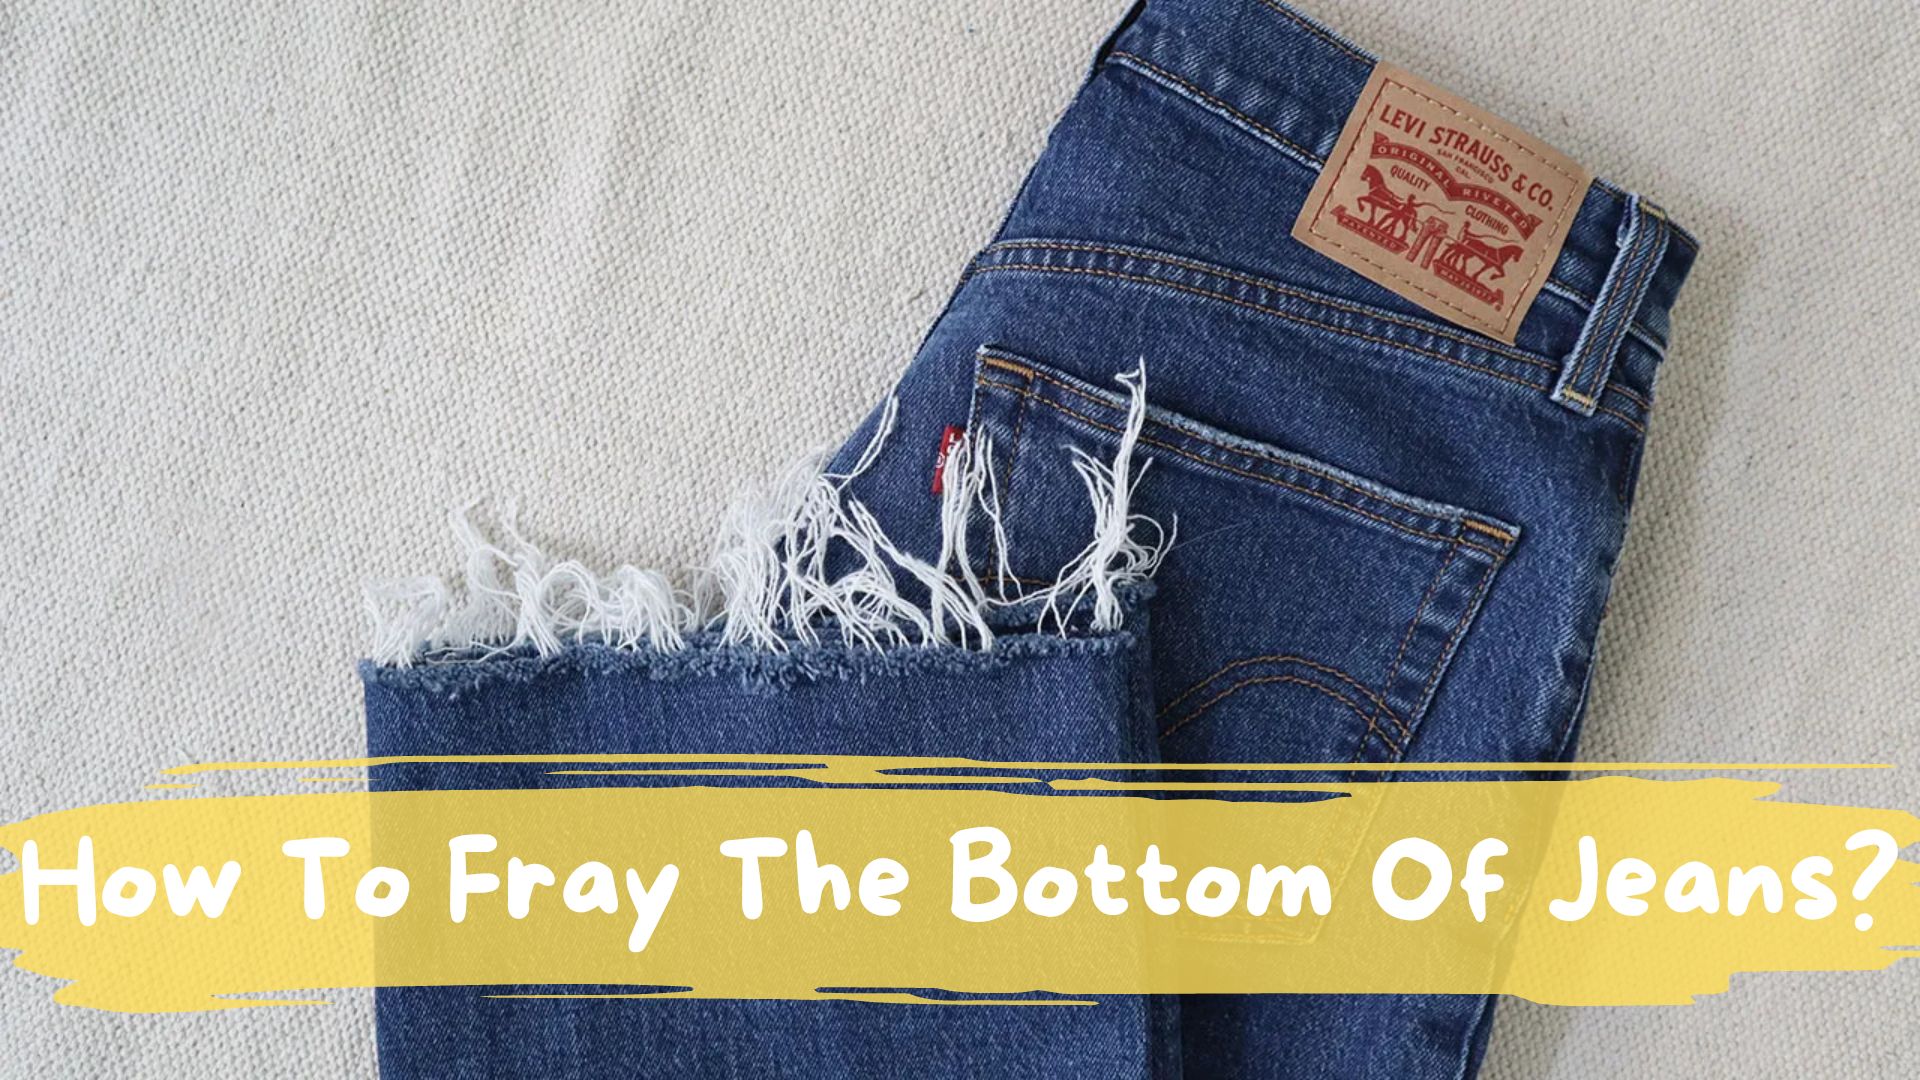 How To Fray The Bottom Of Jeans